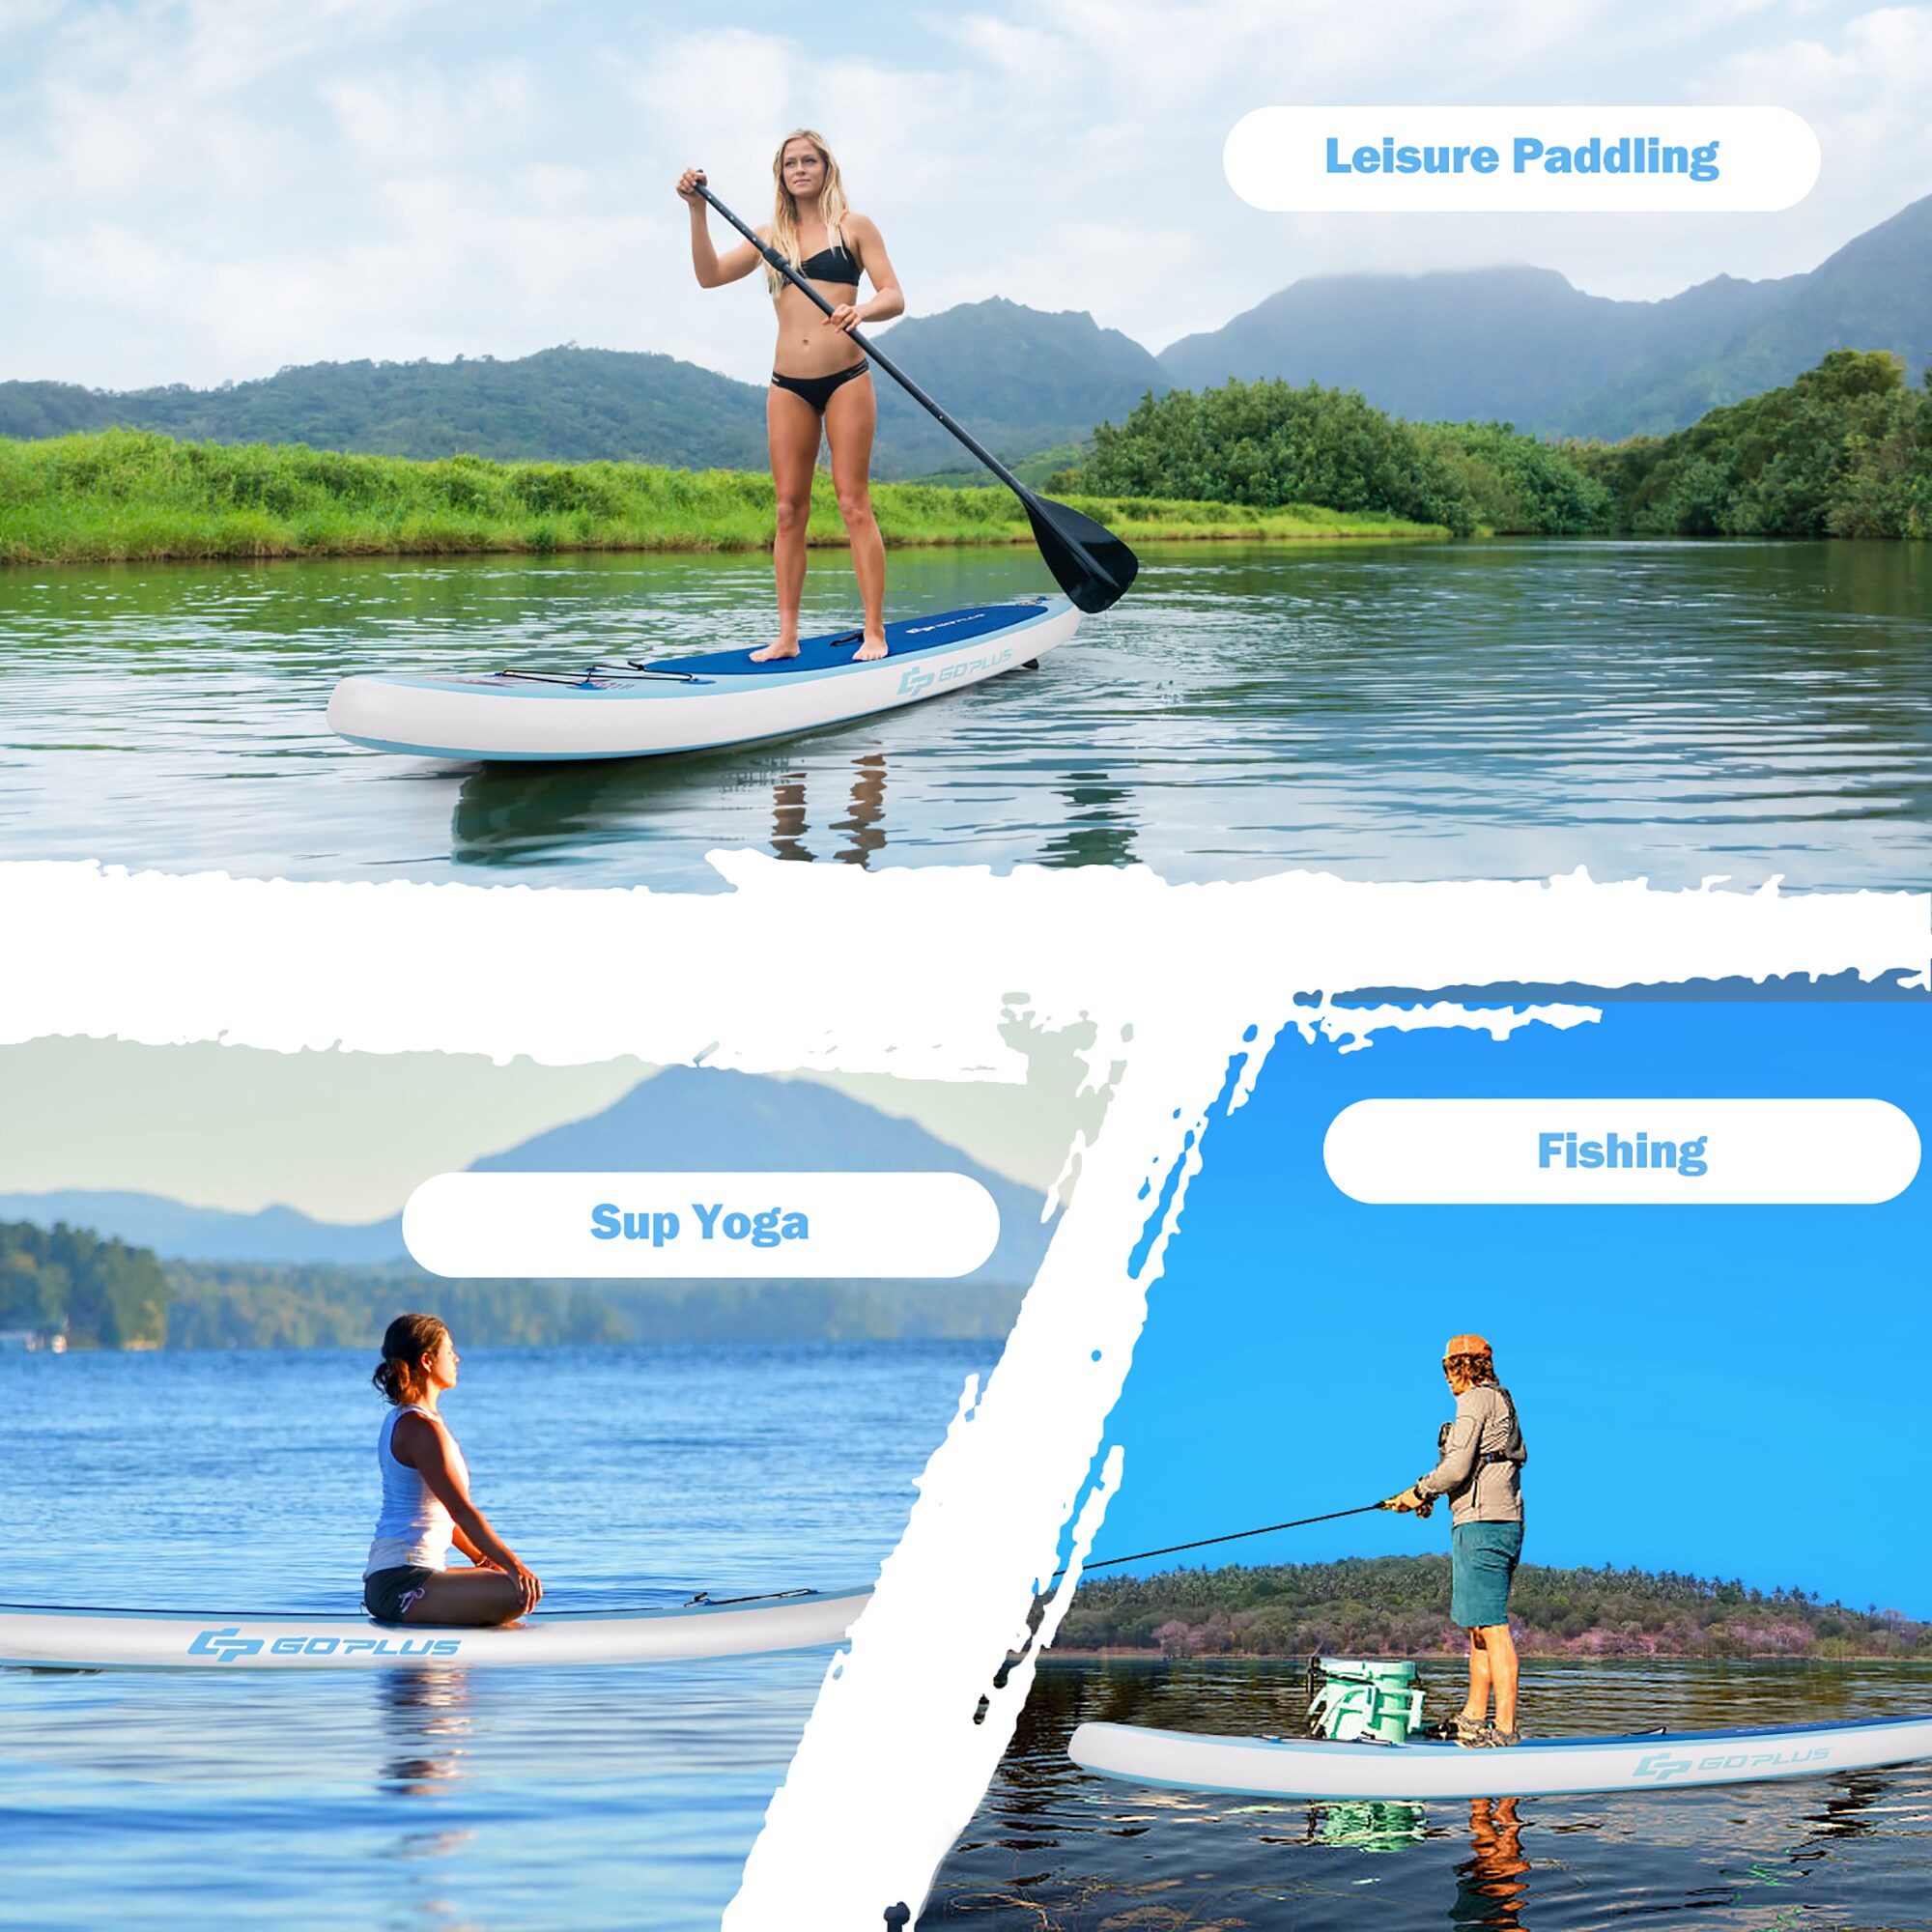 Wide Stance Surf Control Bottom Fin for Paddling Goplus 9.8'/10'/11' Inflatable Stand Up Paddle Board 6.5” Thick SUP with Premium Accessories and Carry Bag Non-Slip Deck for Youth and Adult